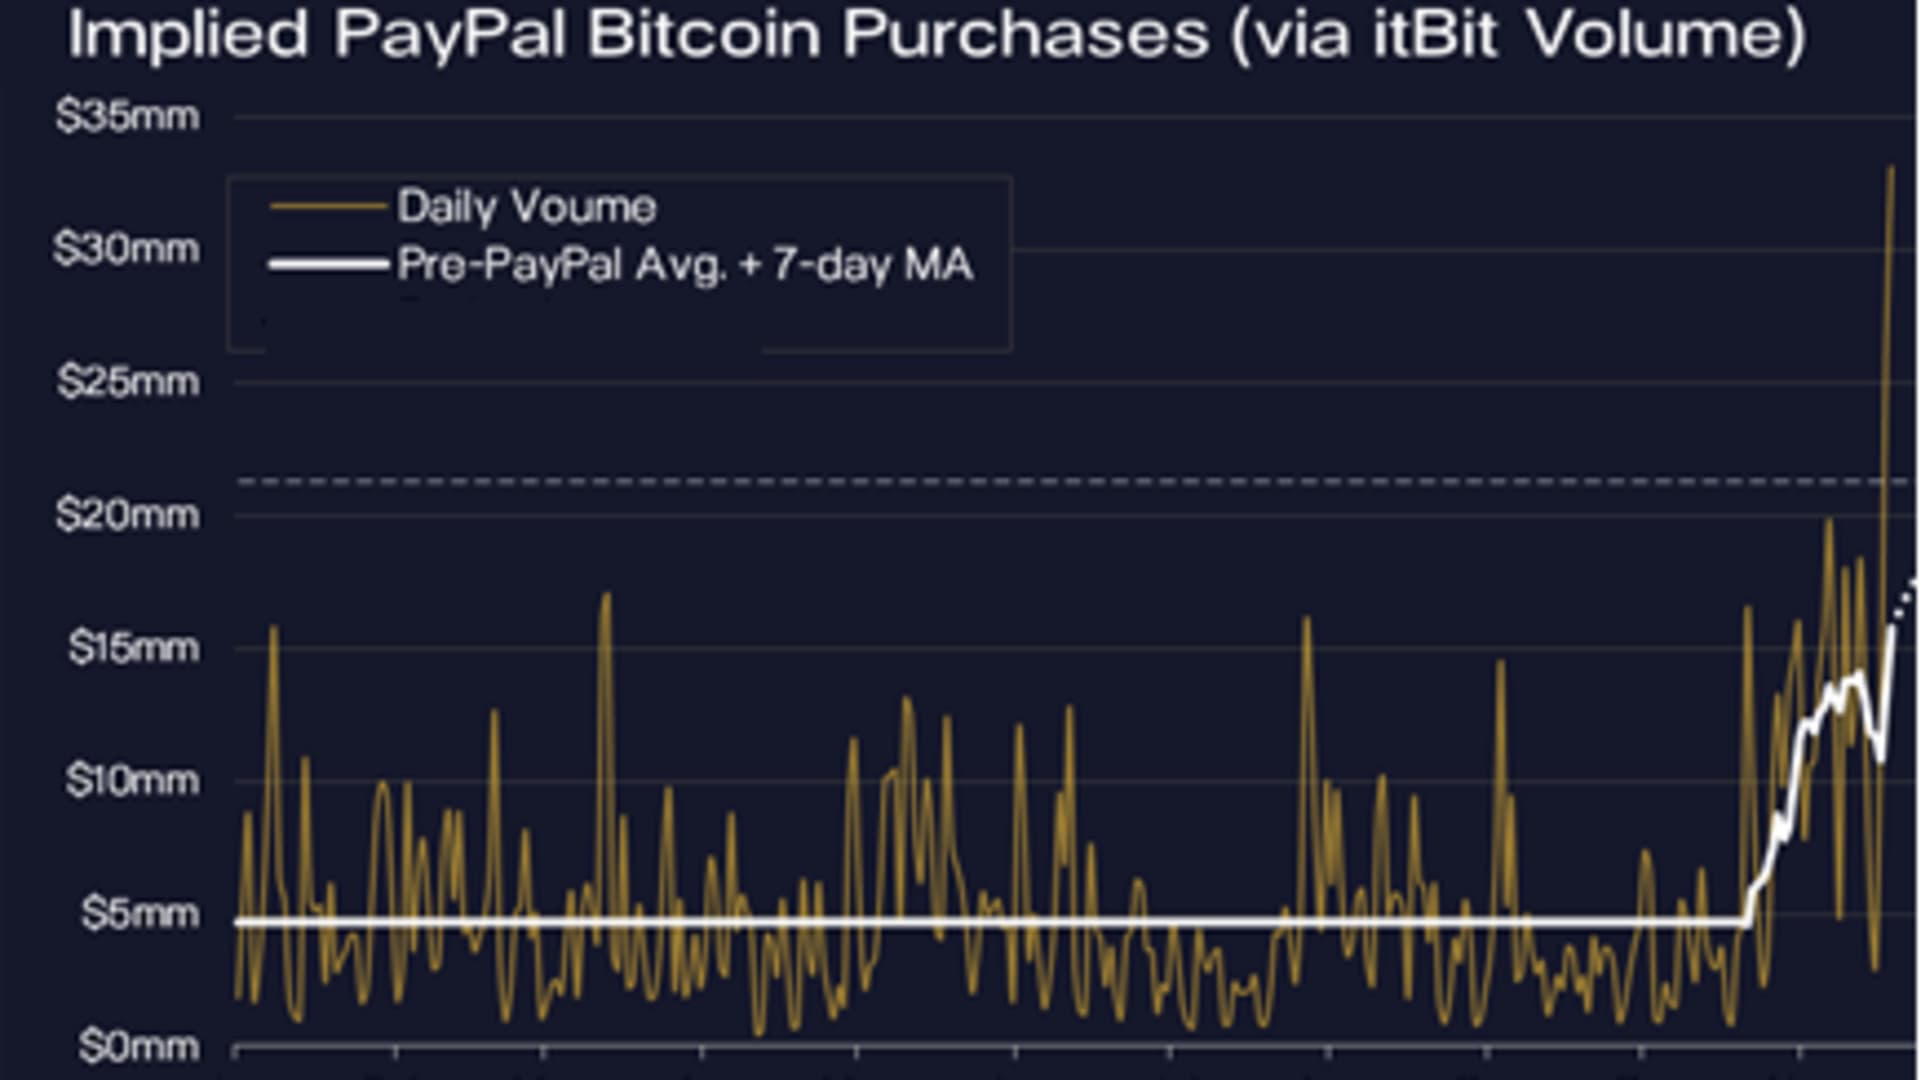 PayPal's implied bitcoin volume